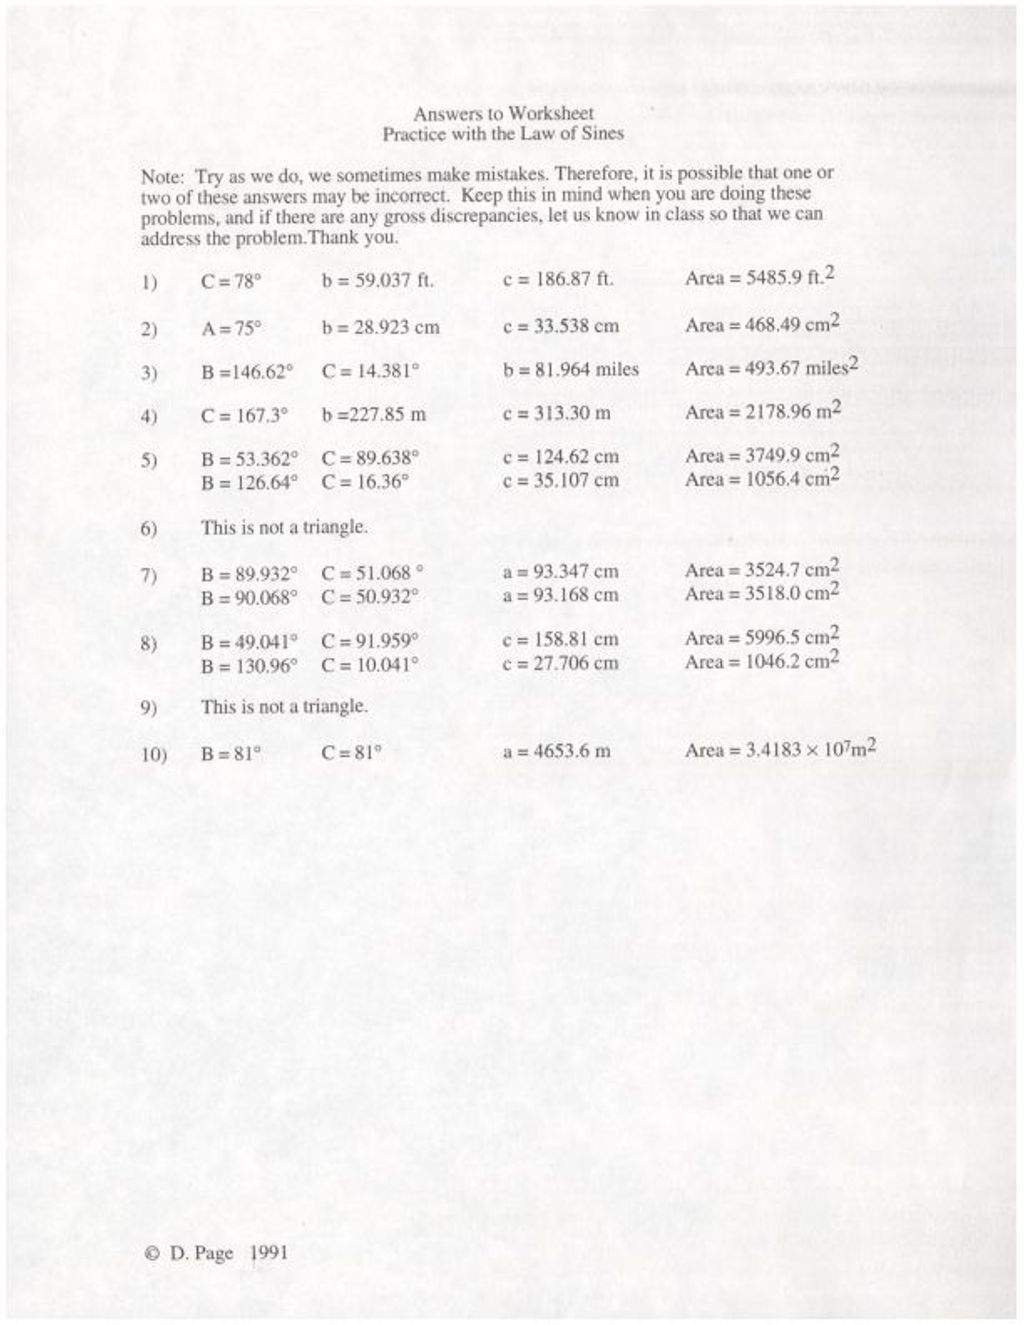 Answers to the Worksheet Practice with the Law of Sines (1991)